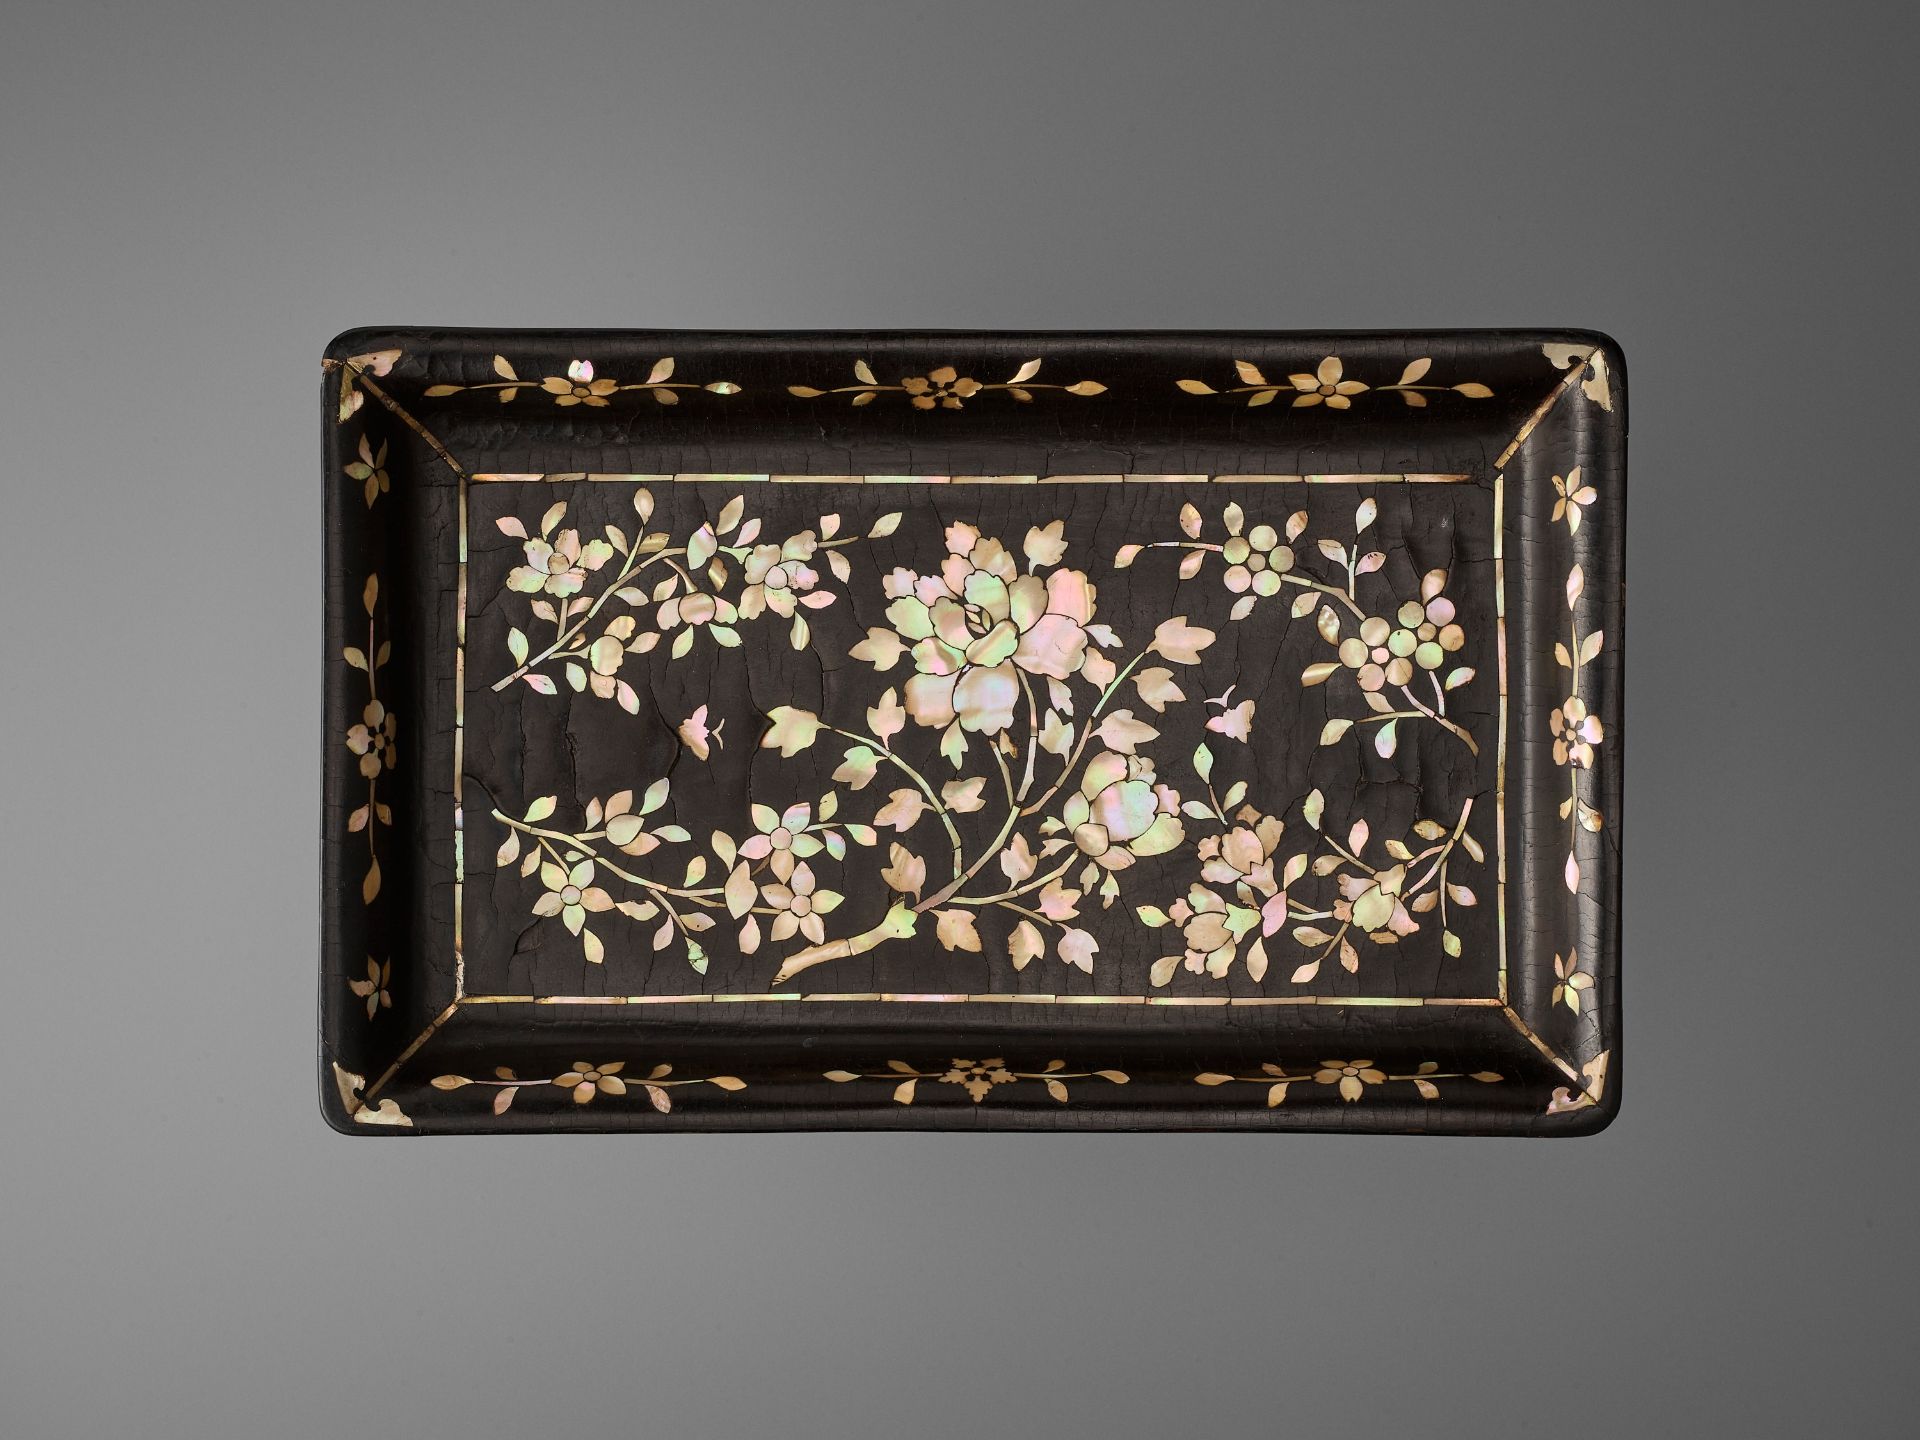 A MOTHER-OF-PEARL INLAID BLACK LACQUER 'PEONY' TRAY, MING DYNASTY